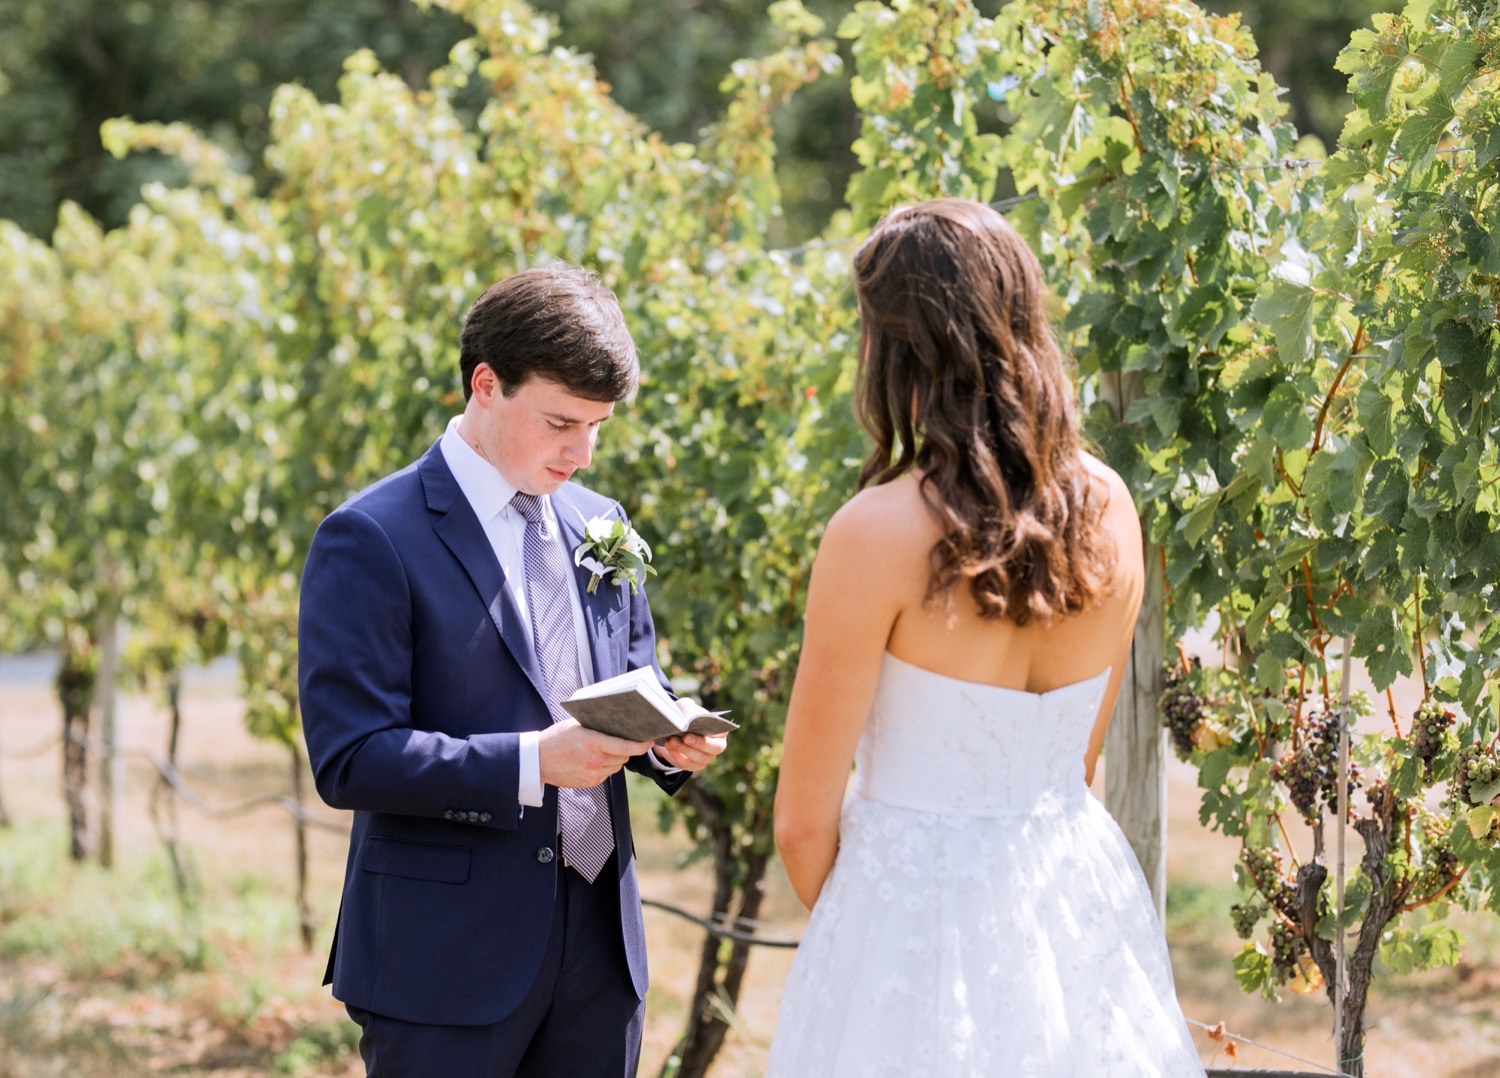 groom reading his vows to his bride in the vineyard before their wedding ceremony